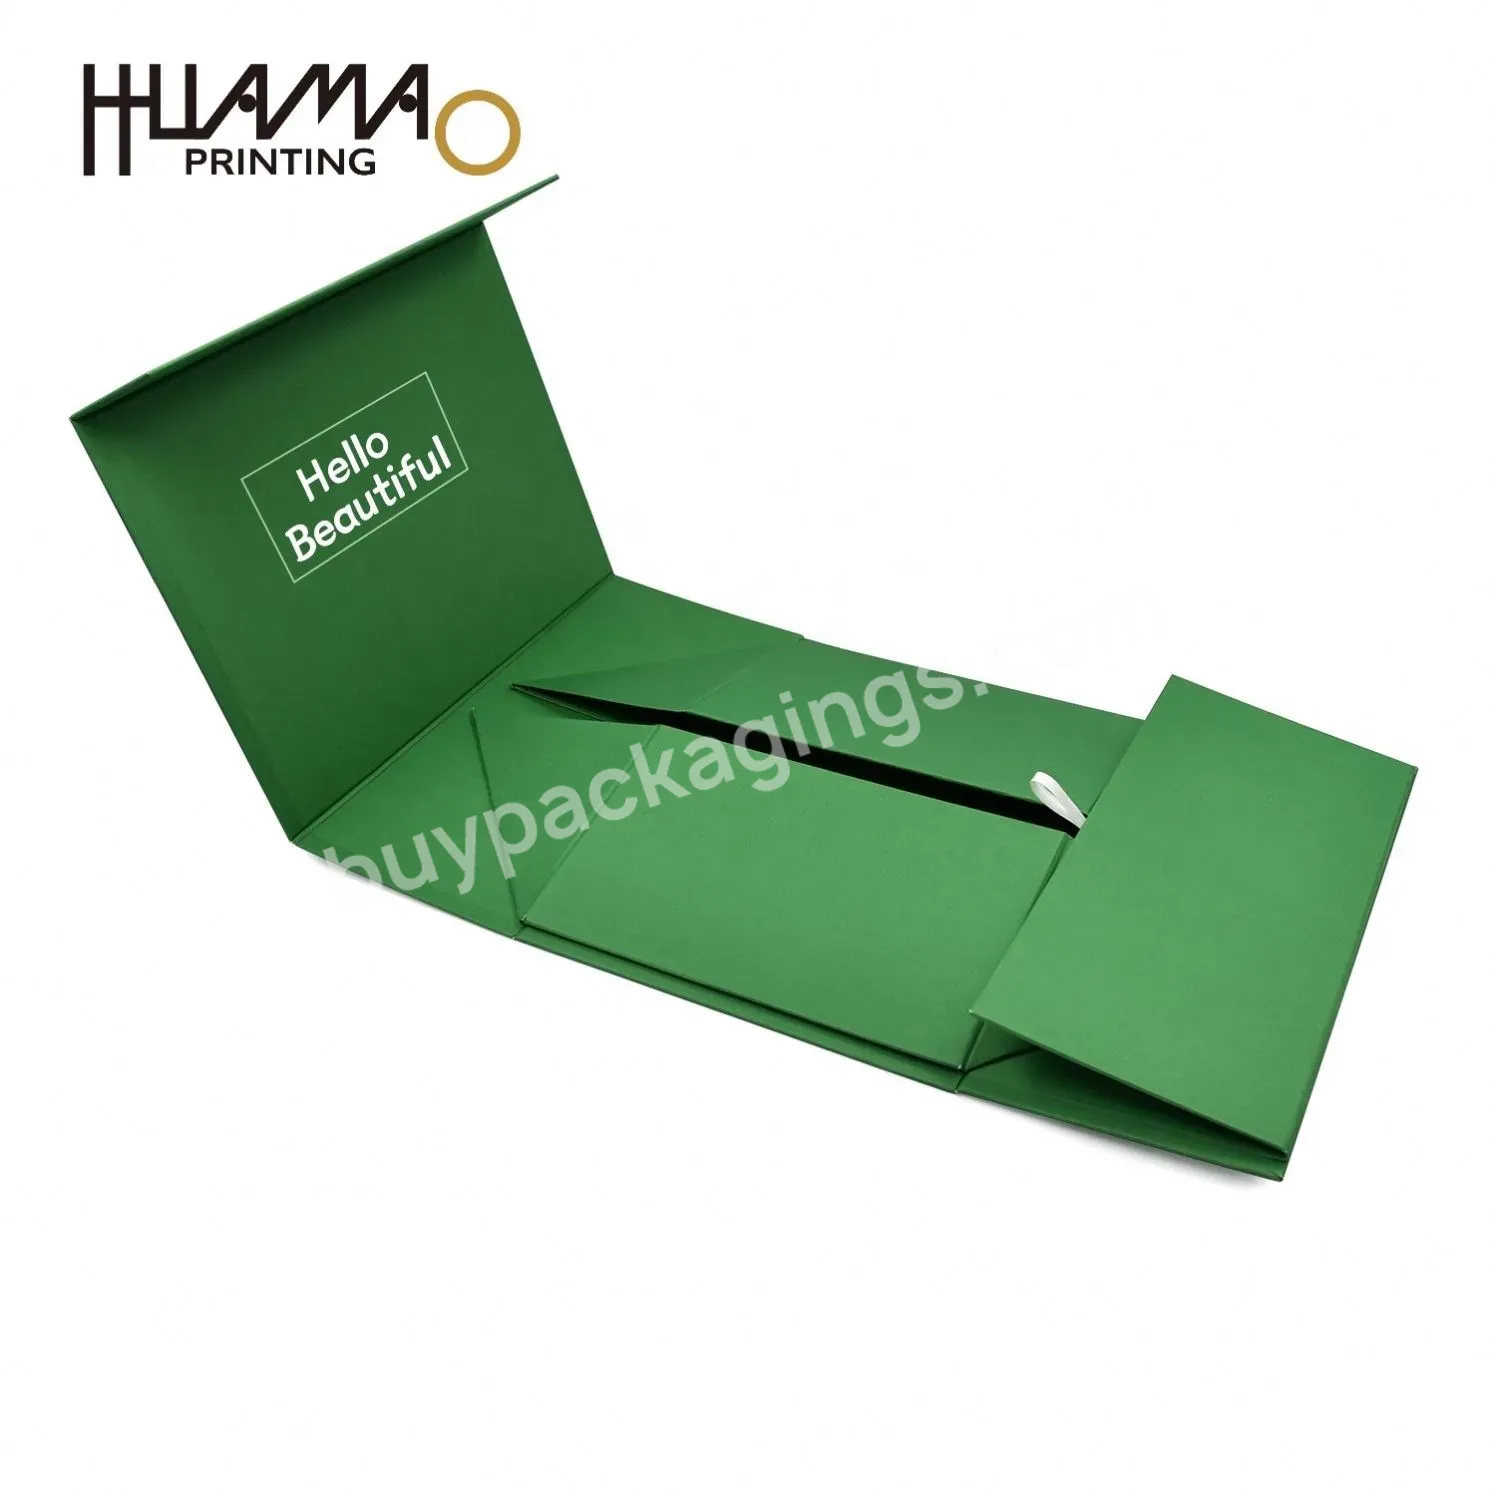 Reflective Sticker Chocolate Bar Packaging Paper Boxes Collapsible Paper Container Foldbable Box Packaging Caja De Regalo